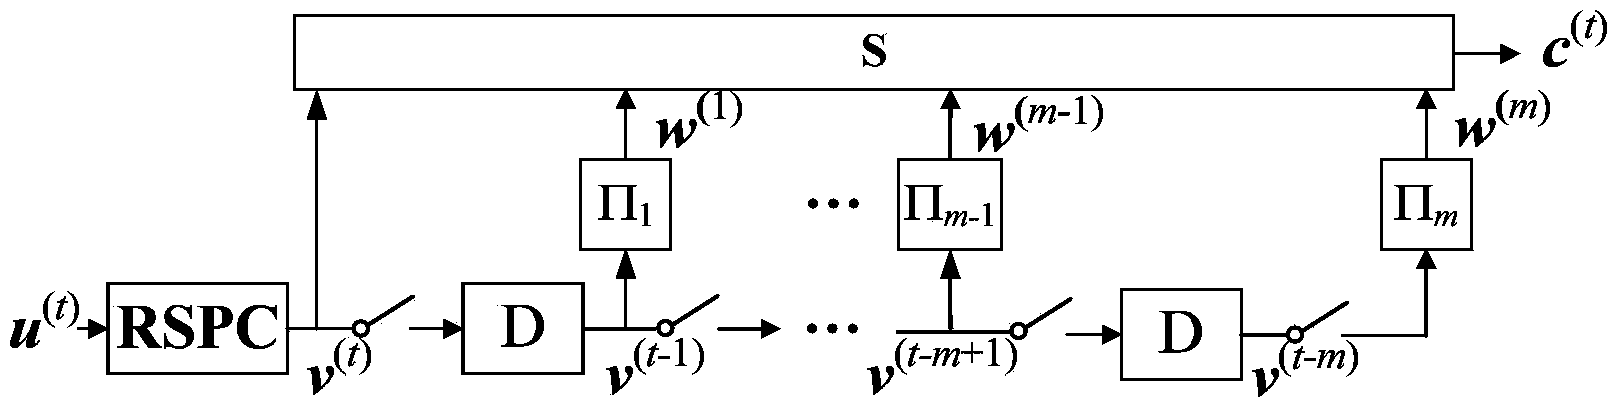 Multi-rate code encoding method for grouped Markov superposition coding based on time division